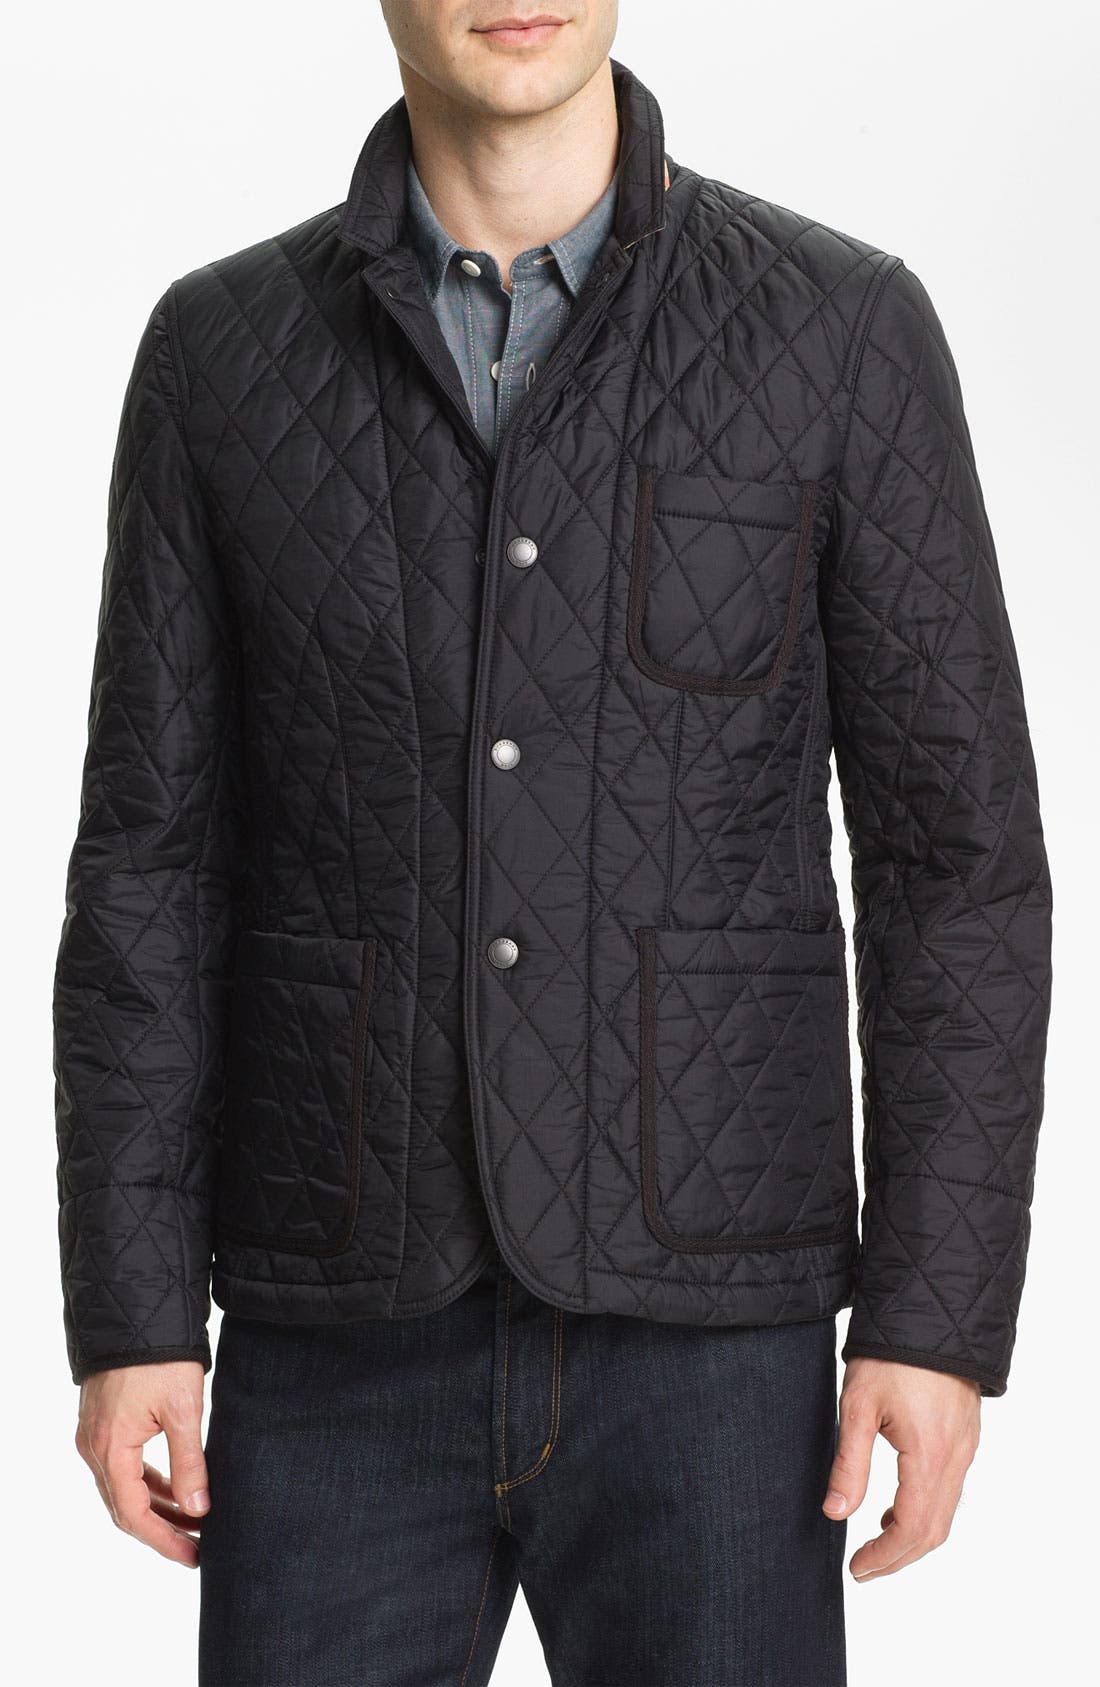 burberry quilted jacket mens sale